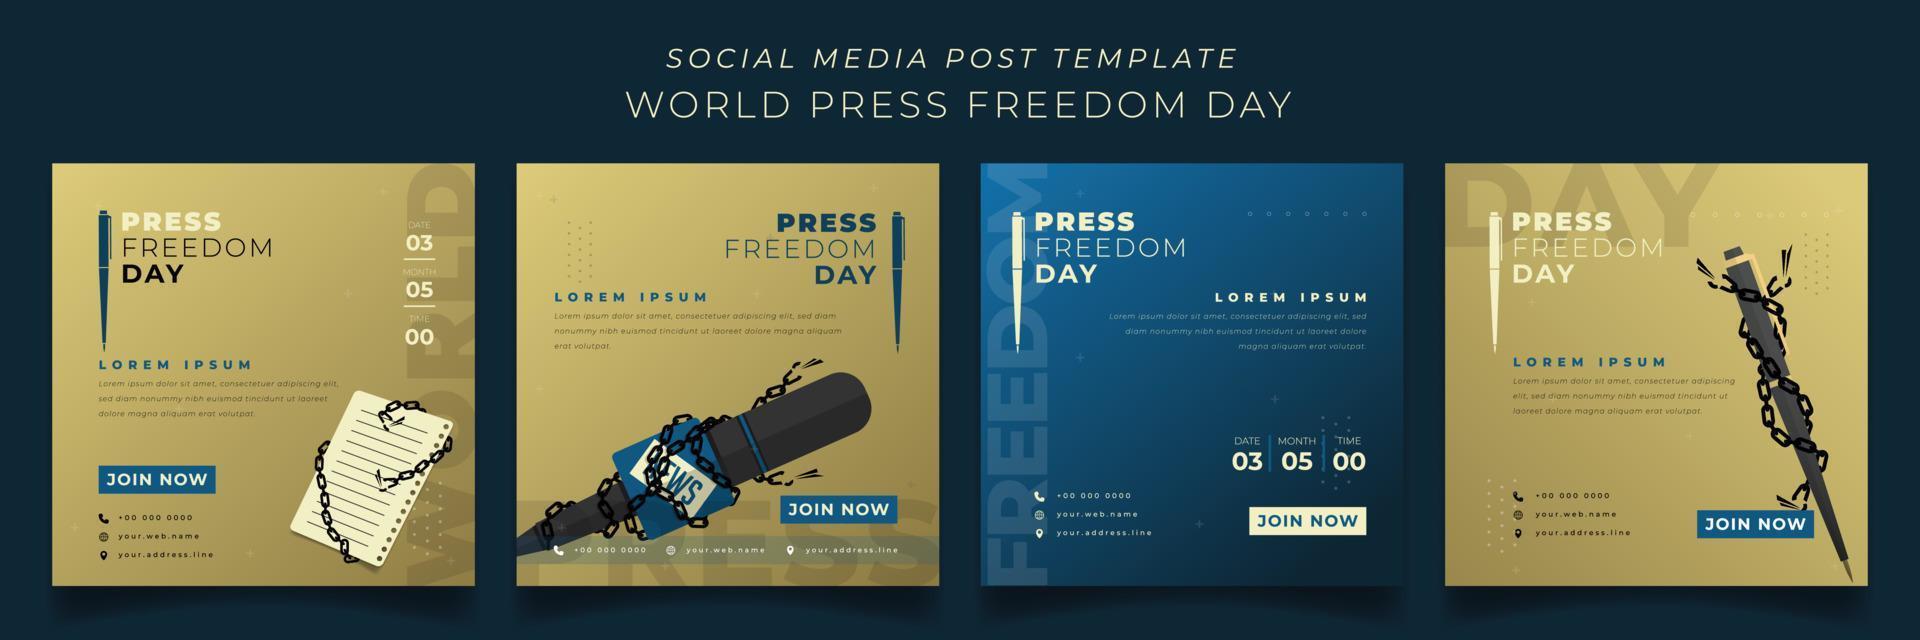 Set of social media template in gold and blue square background for world press freedom day design vector